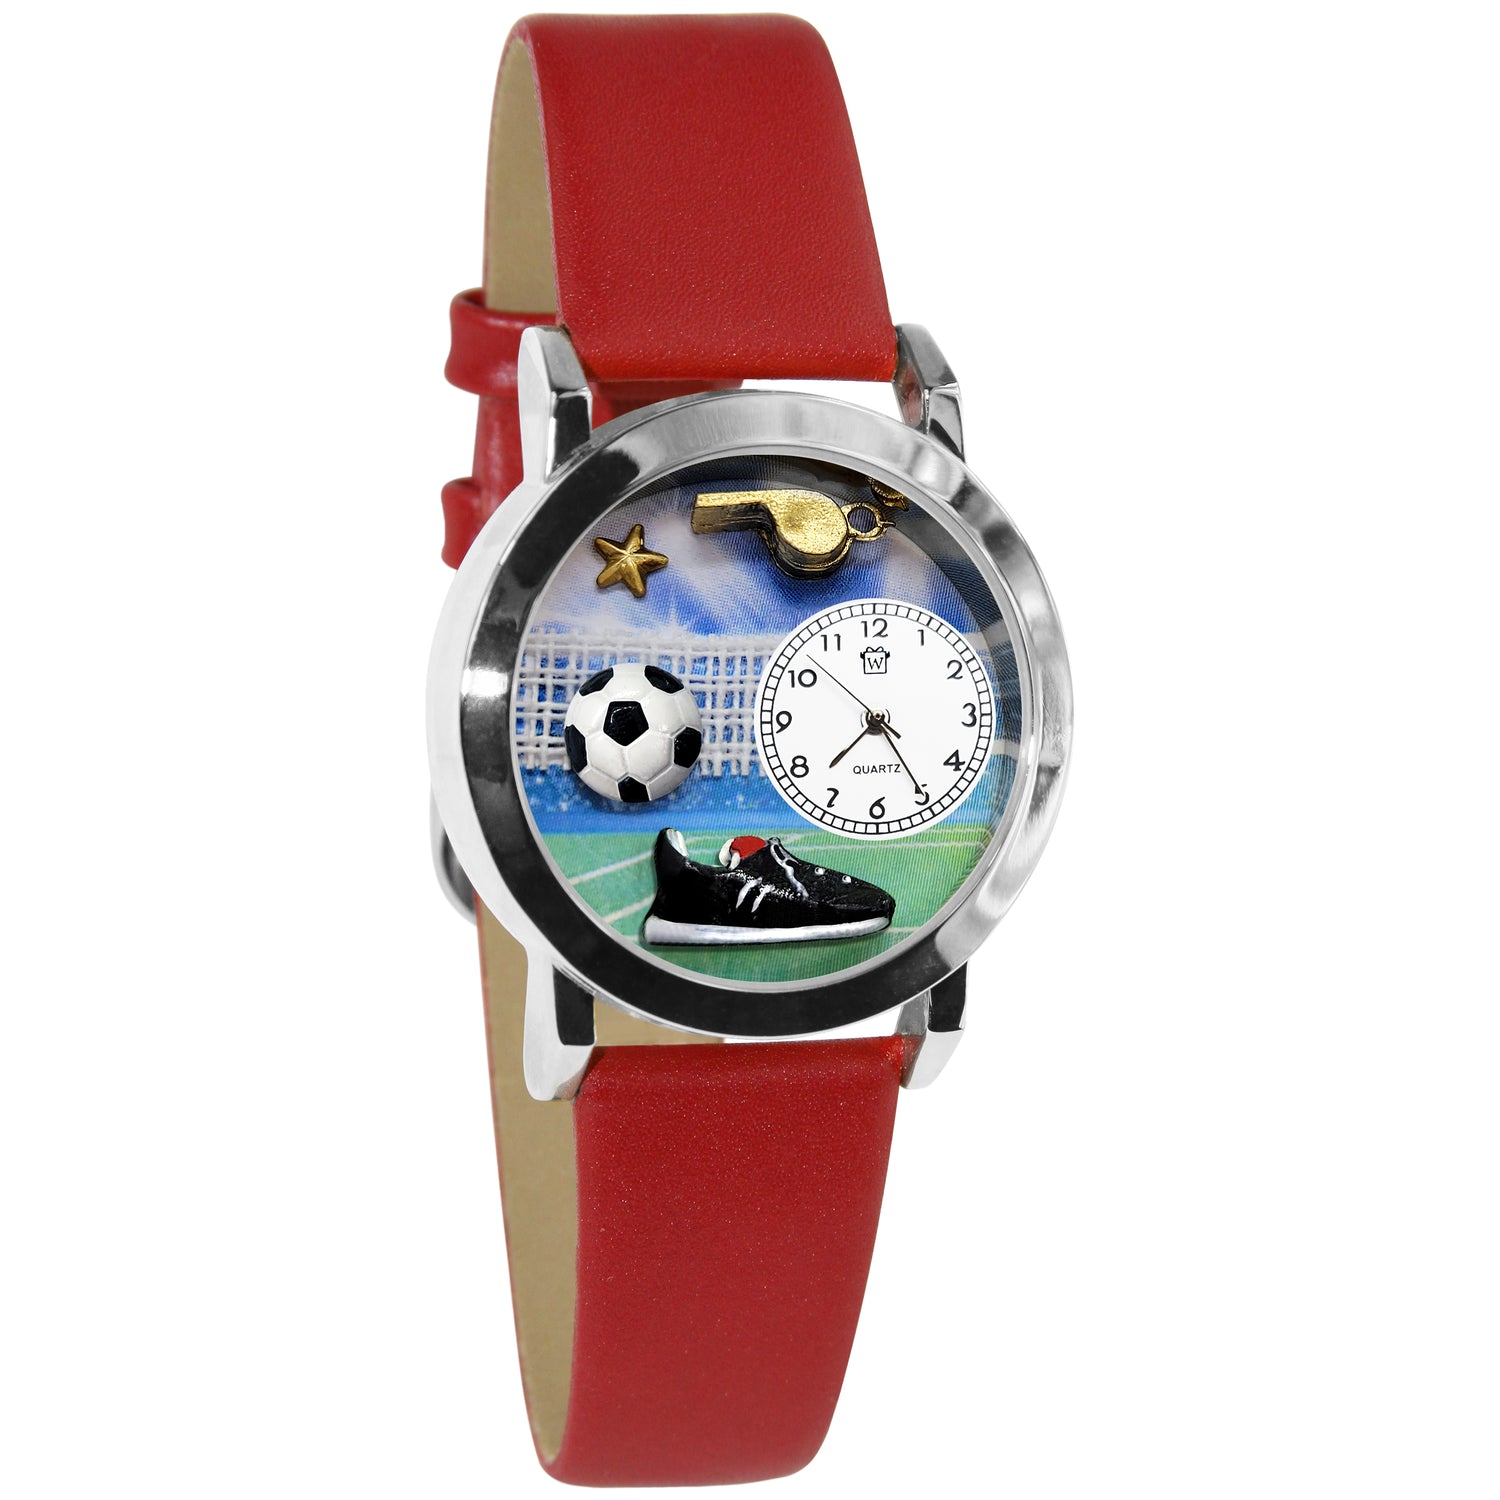 Whimsical Gifts | Soccer 3D Watch Small Style | Handmade in USA | Hobbies & Special Interests | Sports | Novelty Unique Fun Miniatures Gift | Silver Finish Red Leather Watch Band